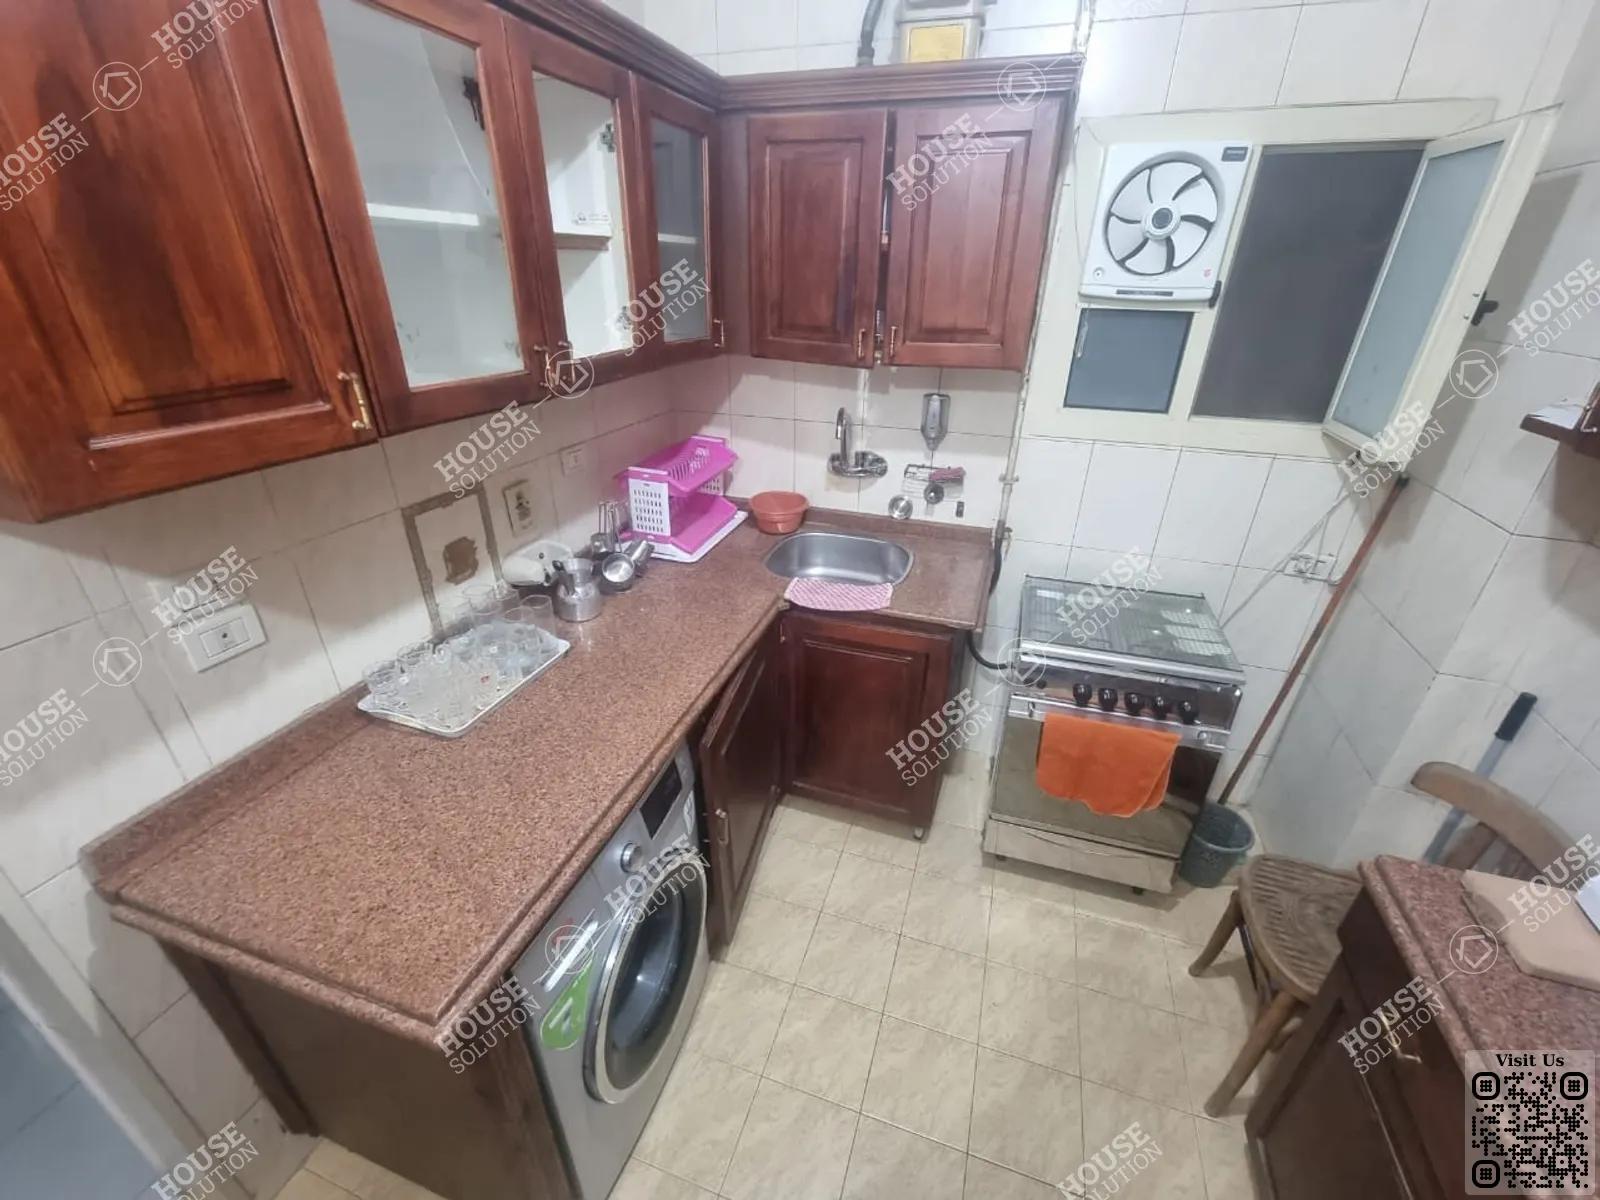 KITCHEN  @ Apartments For Rent In Maadi Maadi Degla Area: 100 m² consists of 2 Bedrooms 1 Bathrooms Furnished 5 stars #4325-0